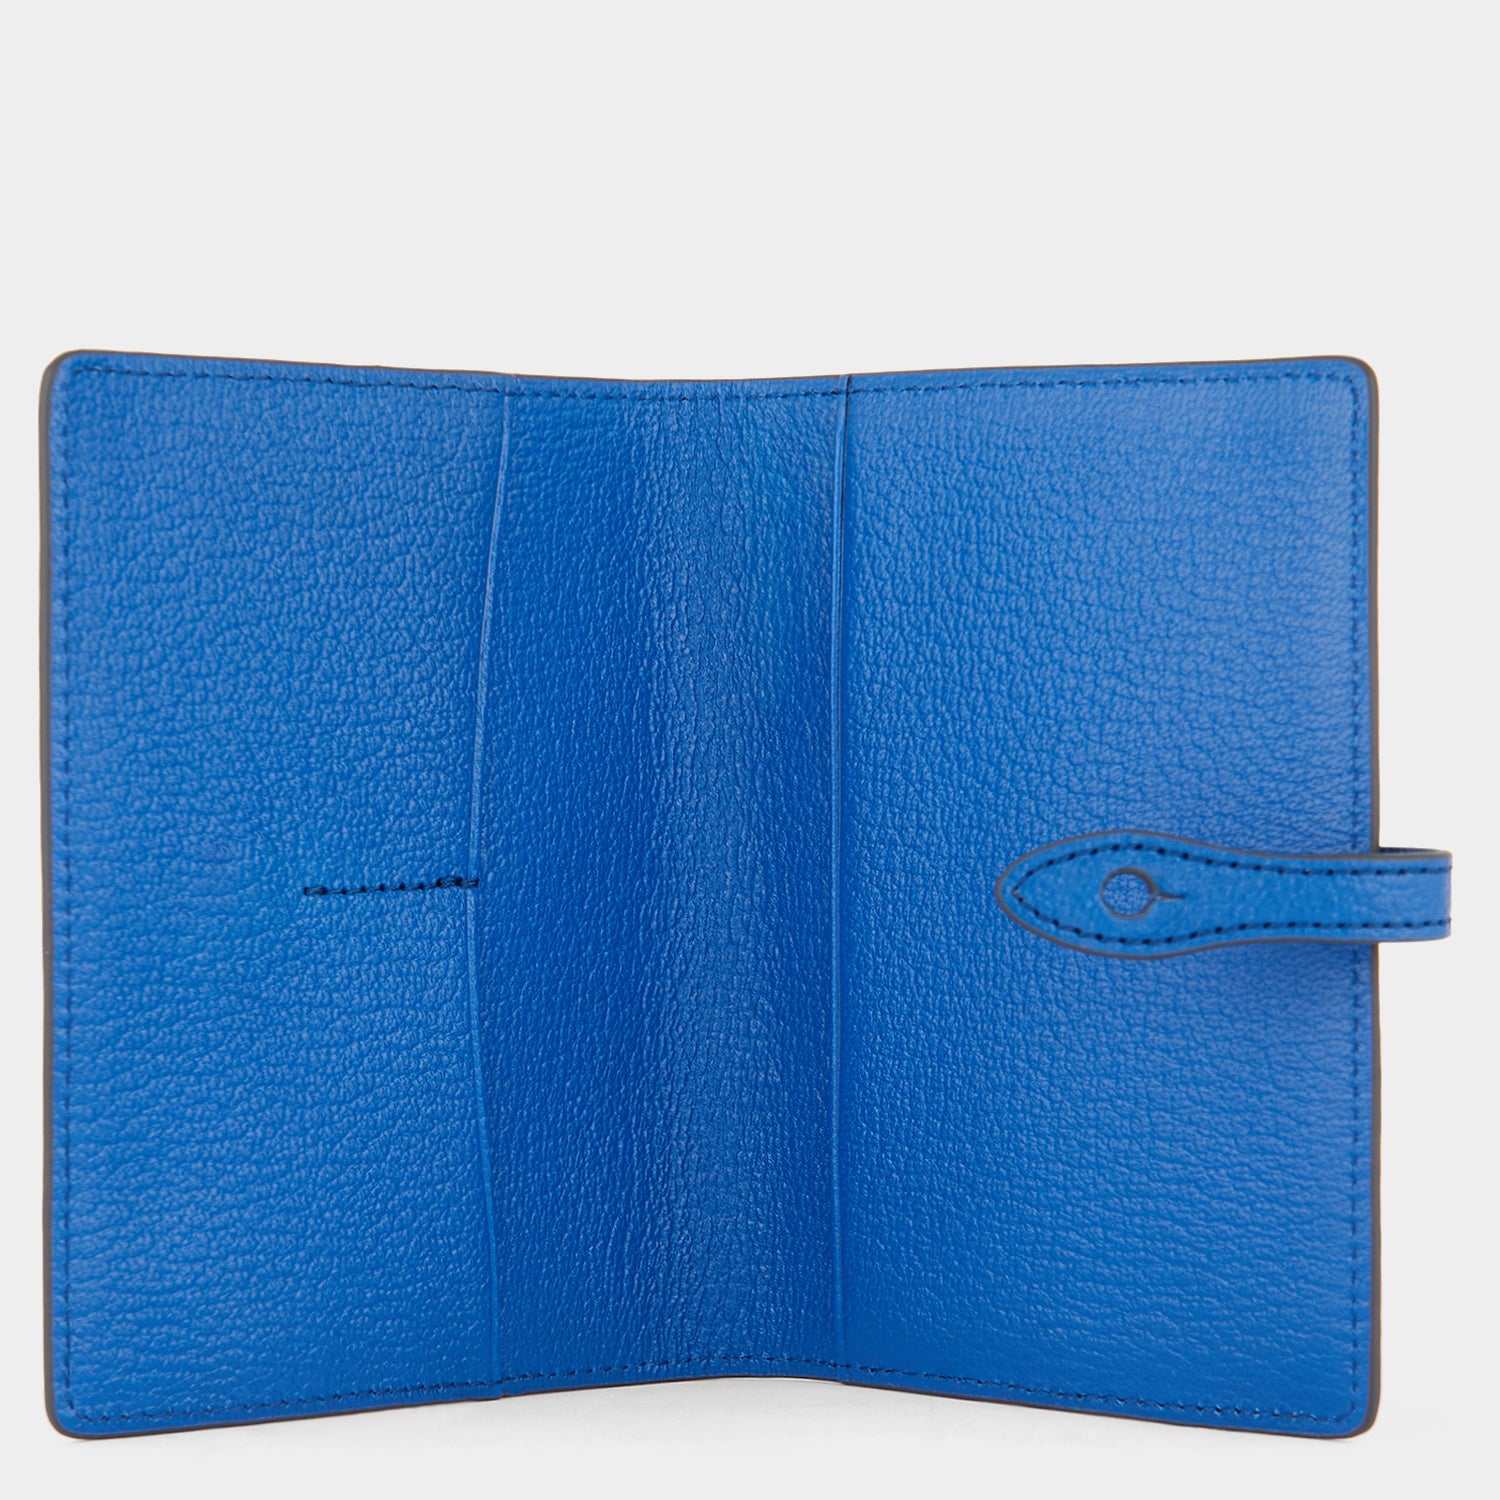 Bespoke Passport Cover -

                  
                    Capra Leather in Electric Blue -
                  

                  Anya Hindmarch UK
